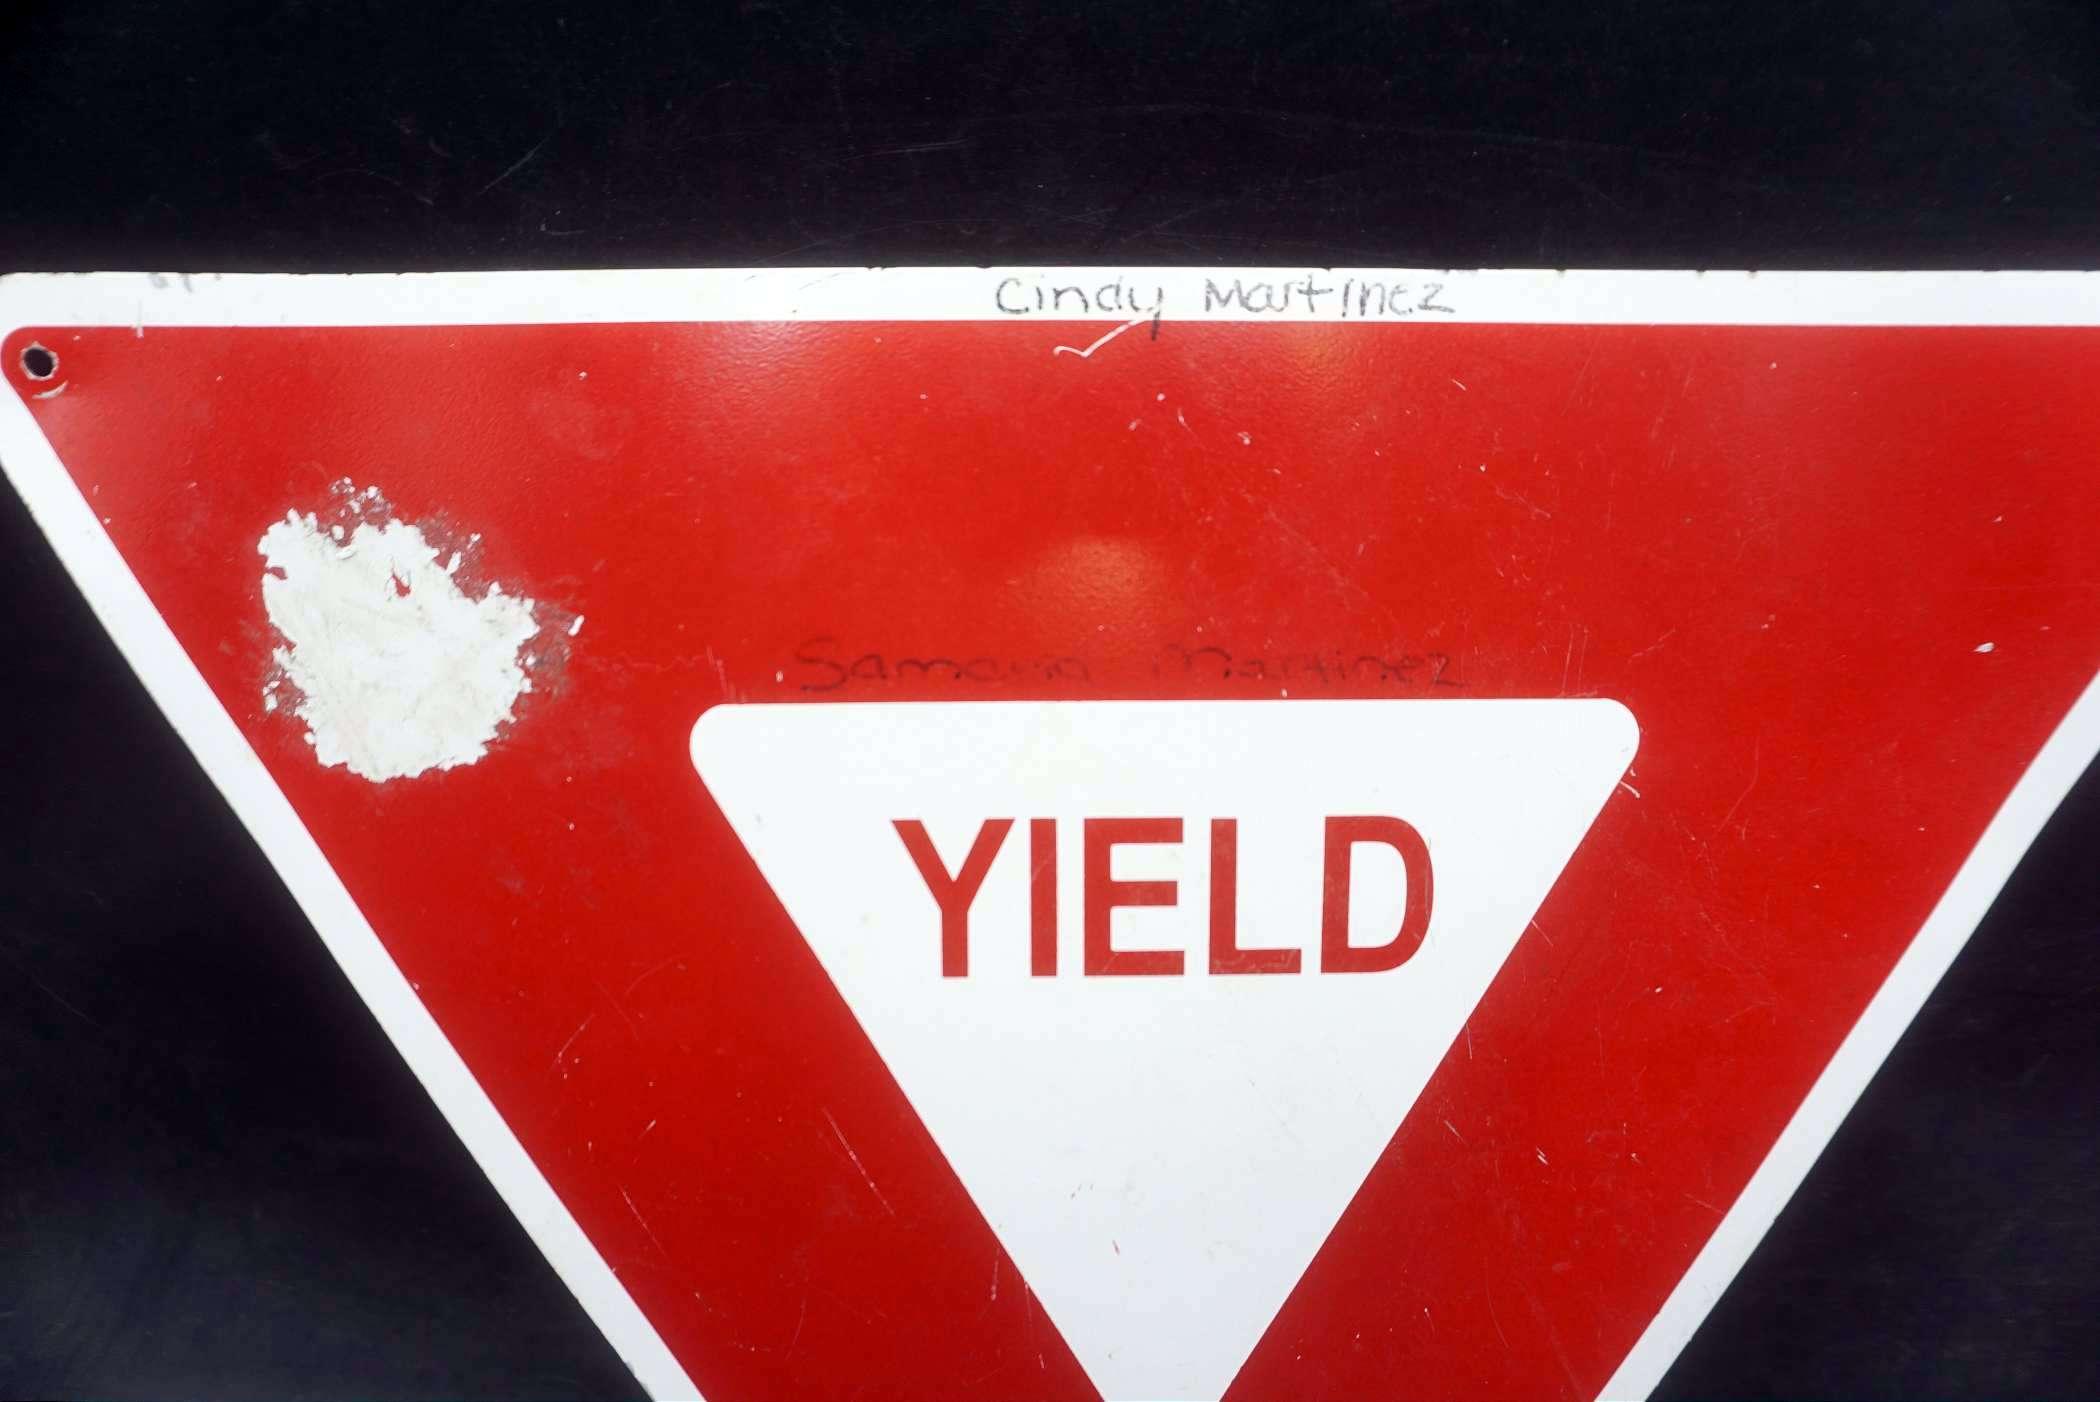 "Yield" Metal Sign (Some Scratches & Scuffs)